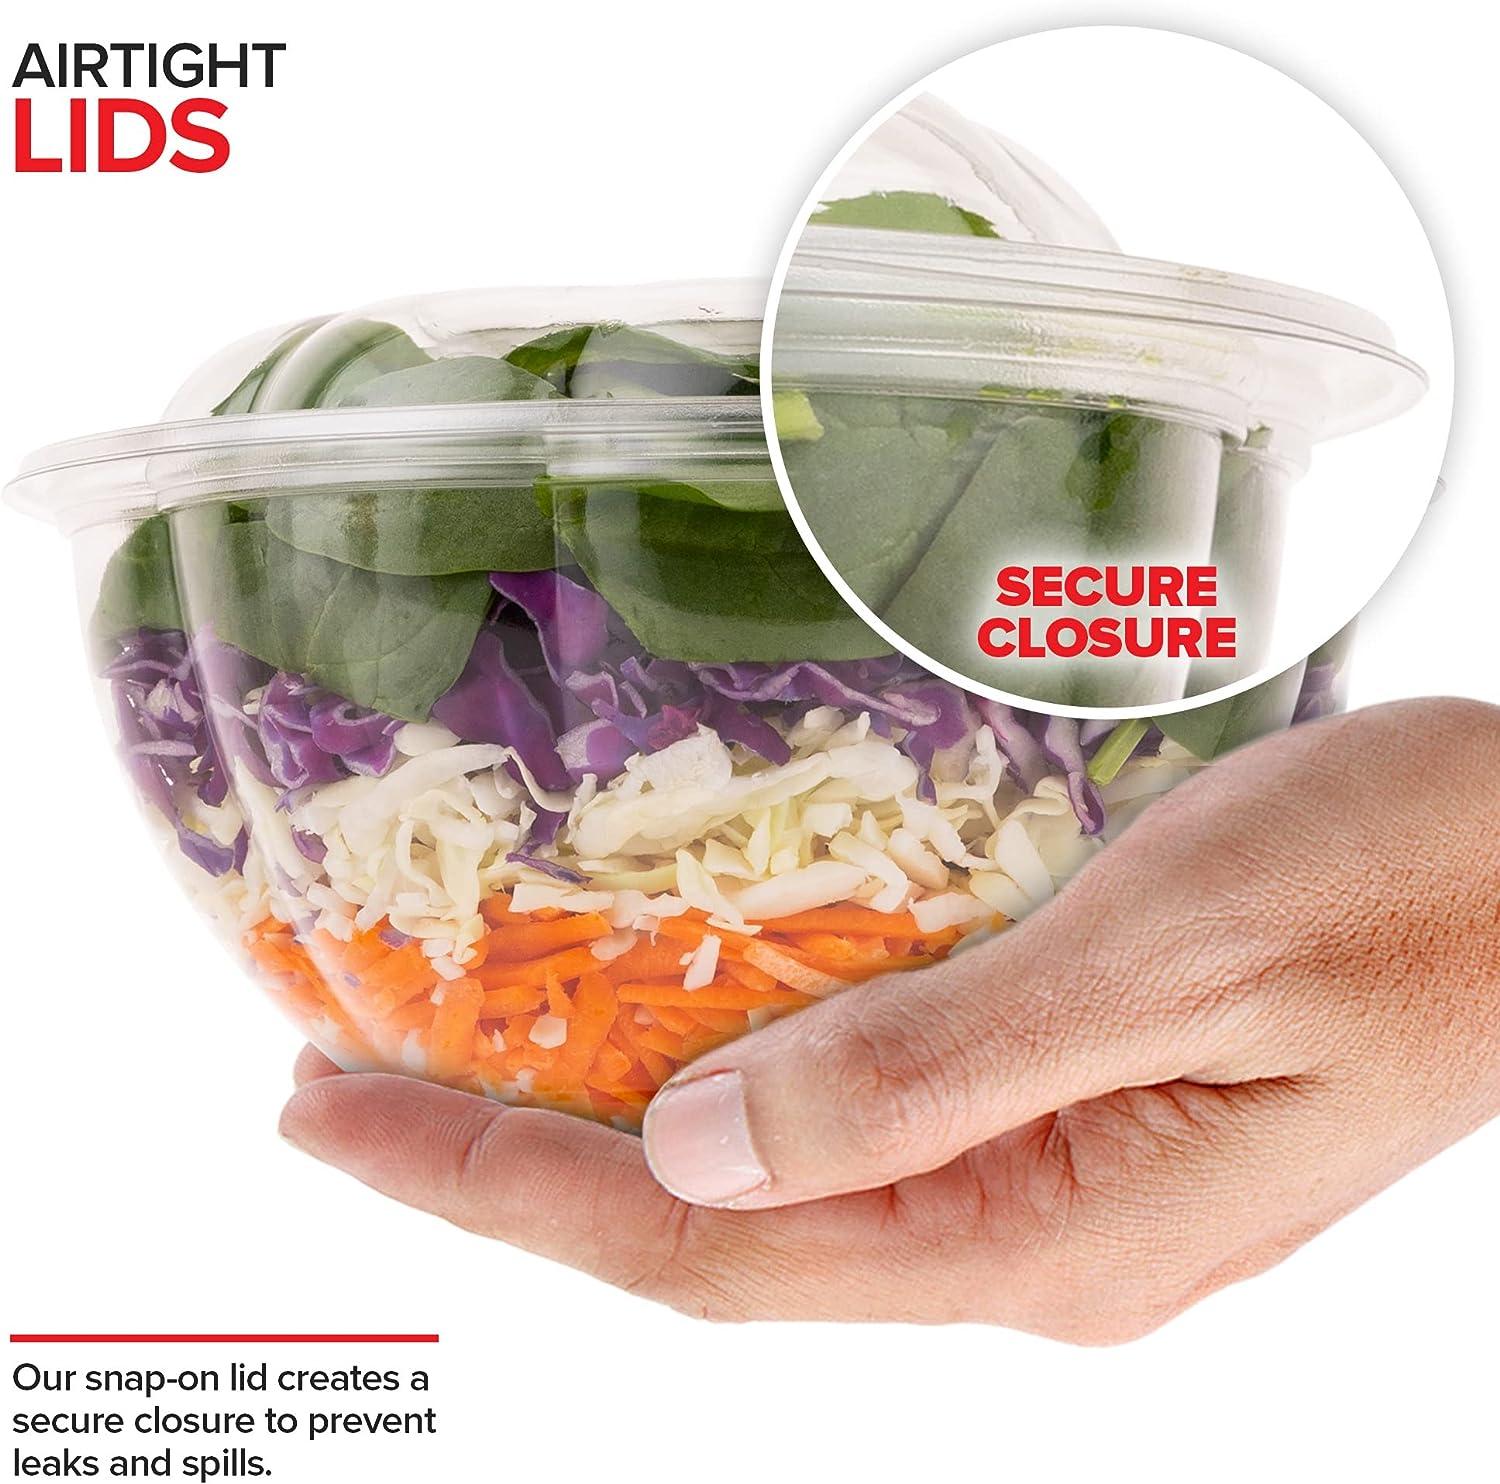 Stock Your Home Disposable Salad Bowls with Lids (50 Count) 48 oz. Plastic  Salad Bowls - Large Salad Bowl To-Go Container with Airtight Lids